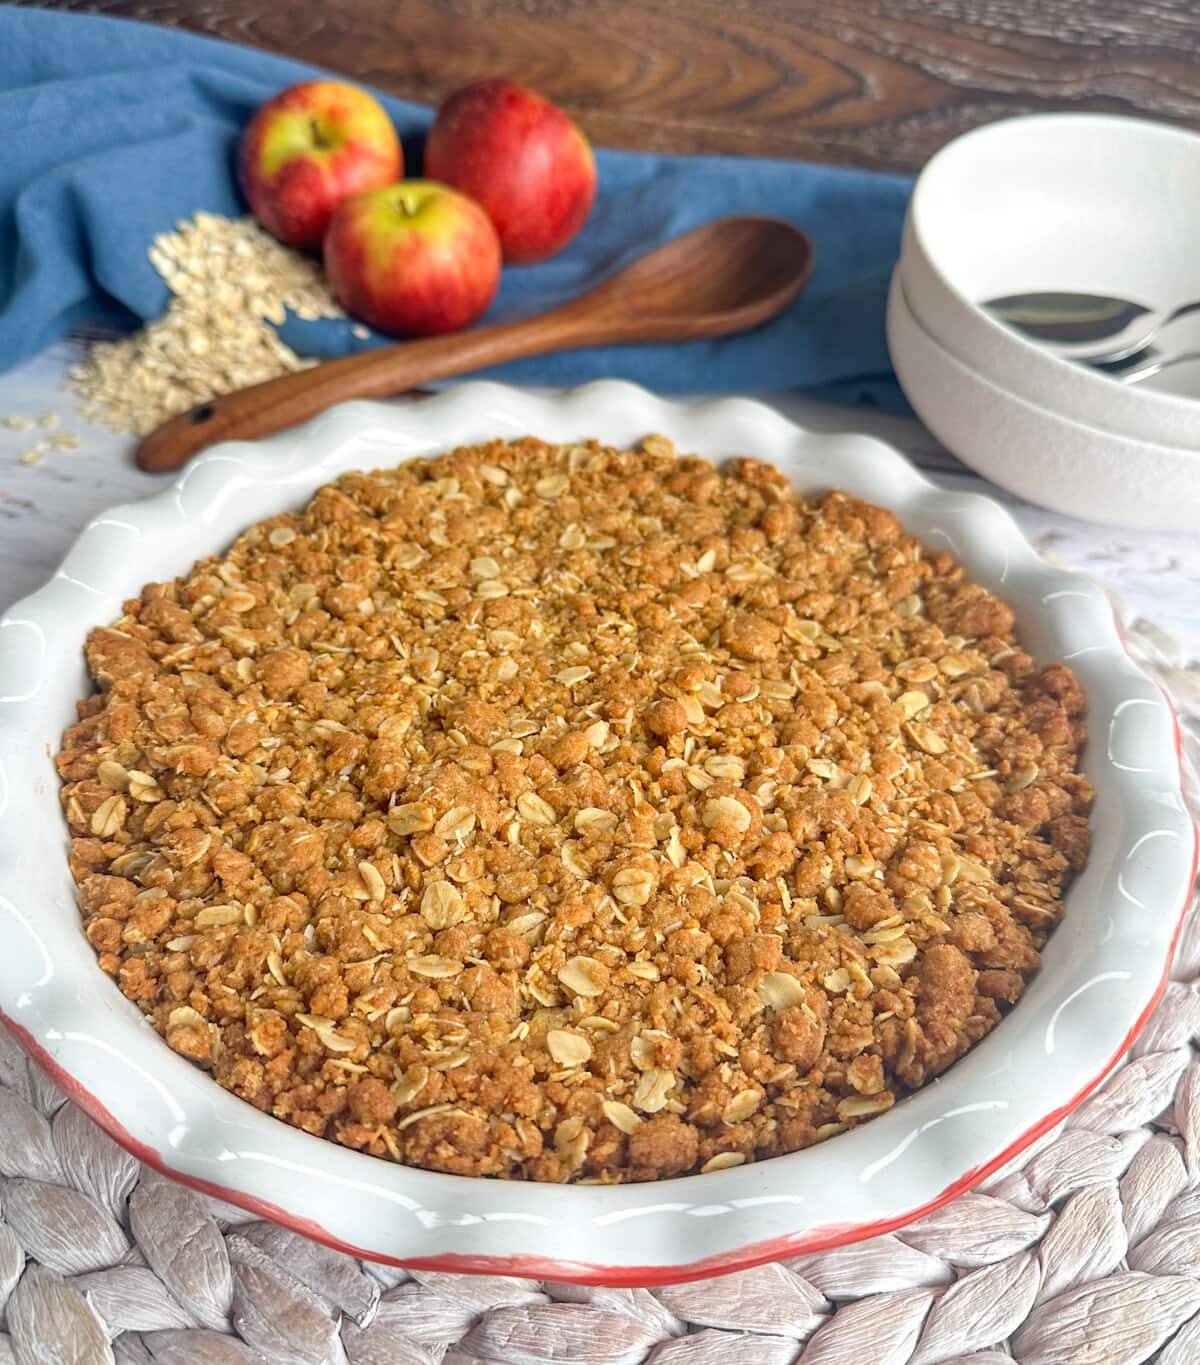 Anzac Apple Crumble, golden brown fresh from the oven in a red and white pie dish